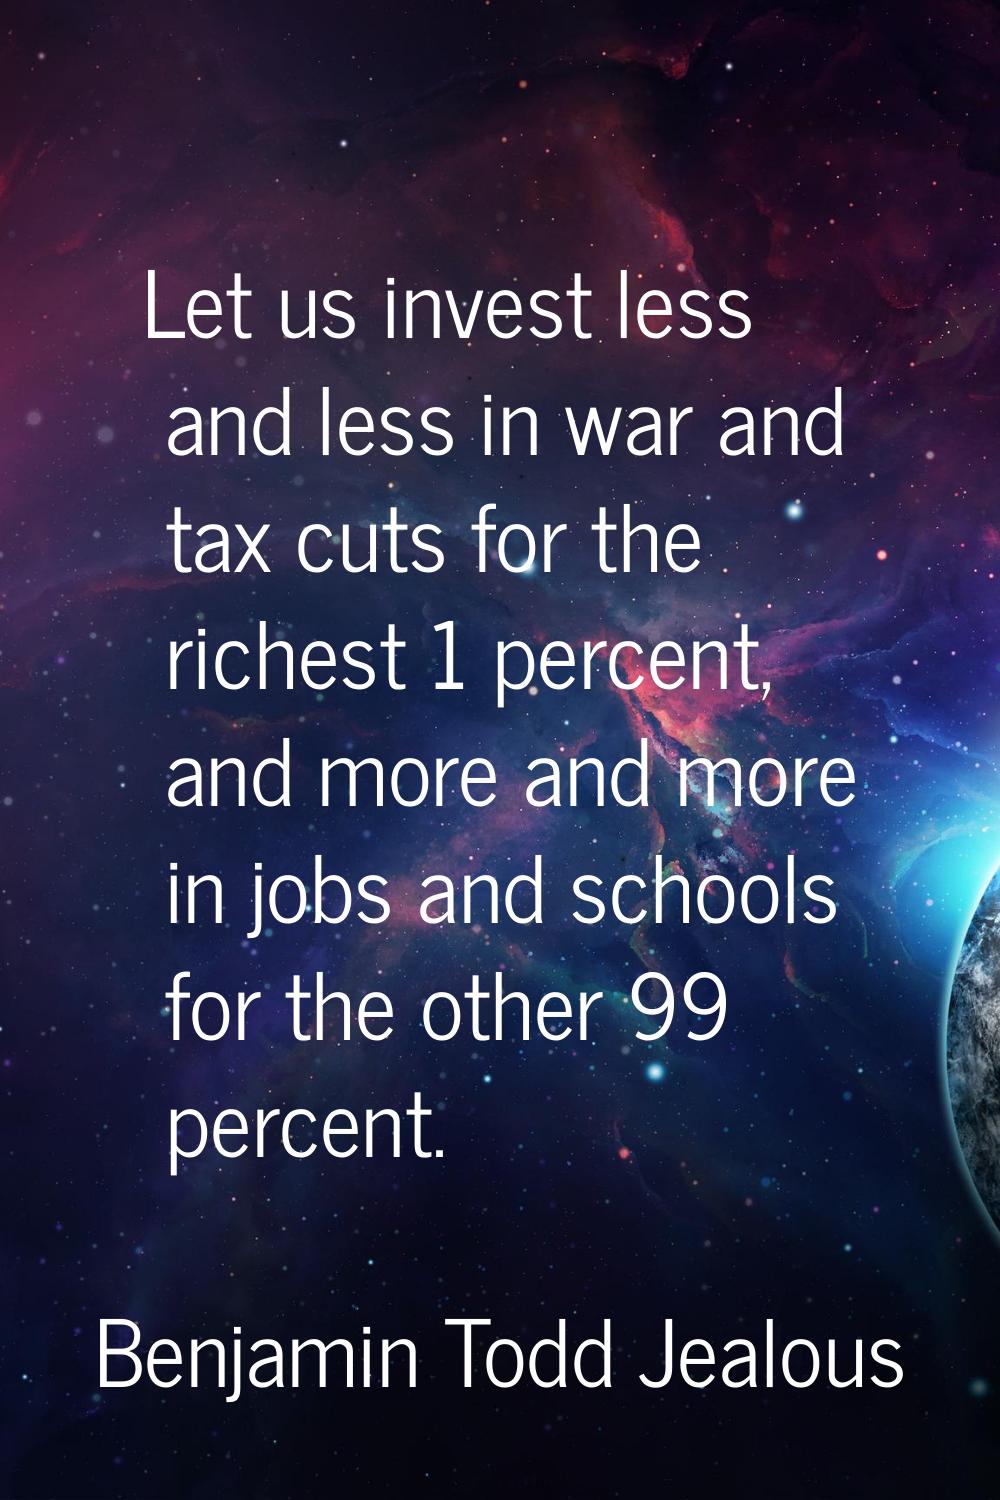 Let us invest less and less in war and tax cuts for the richest 1 percent, and more and more in job